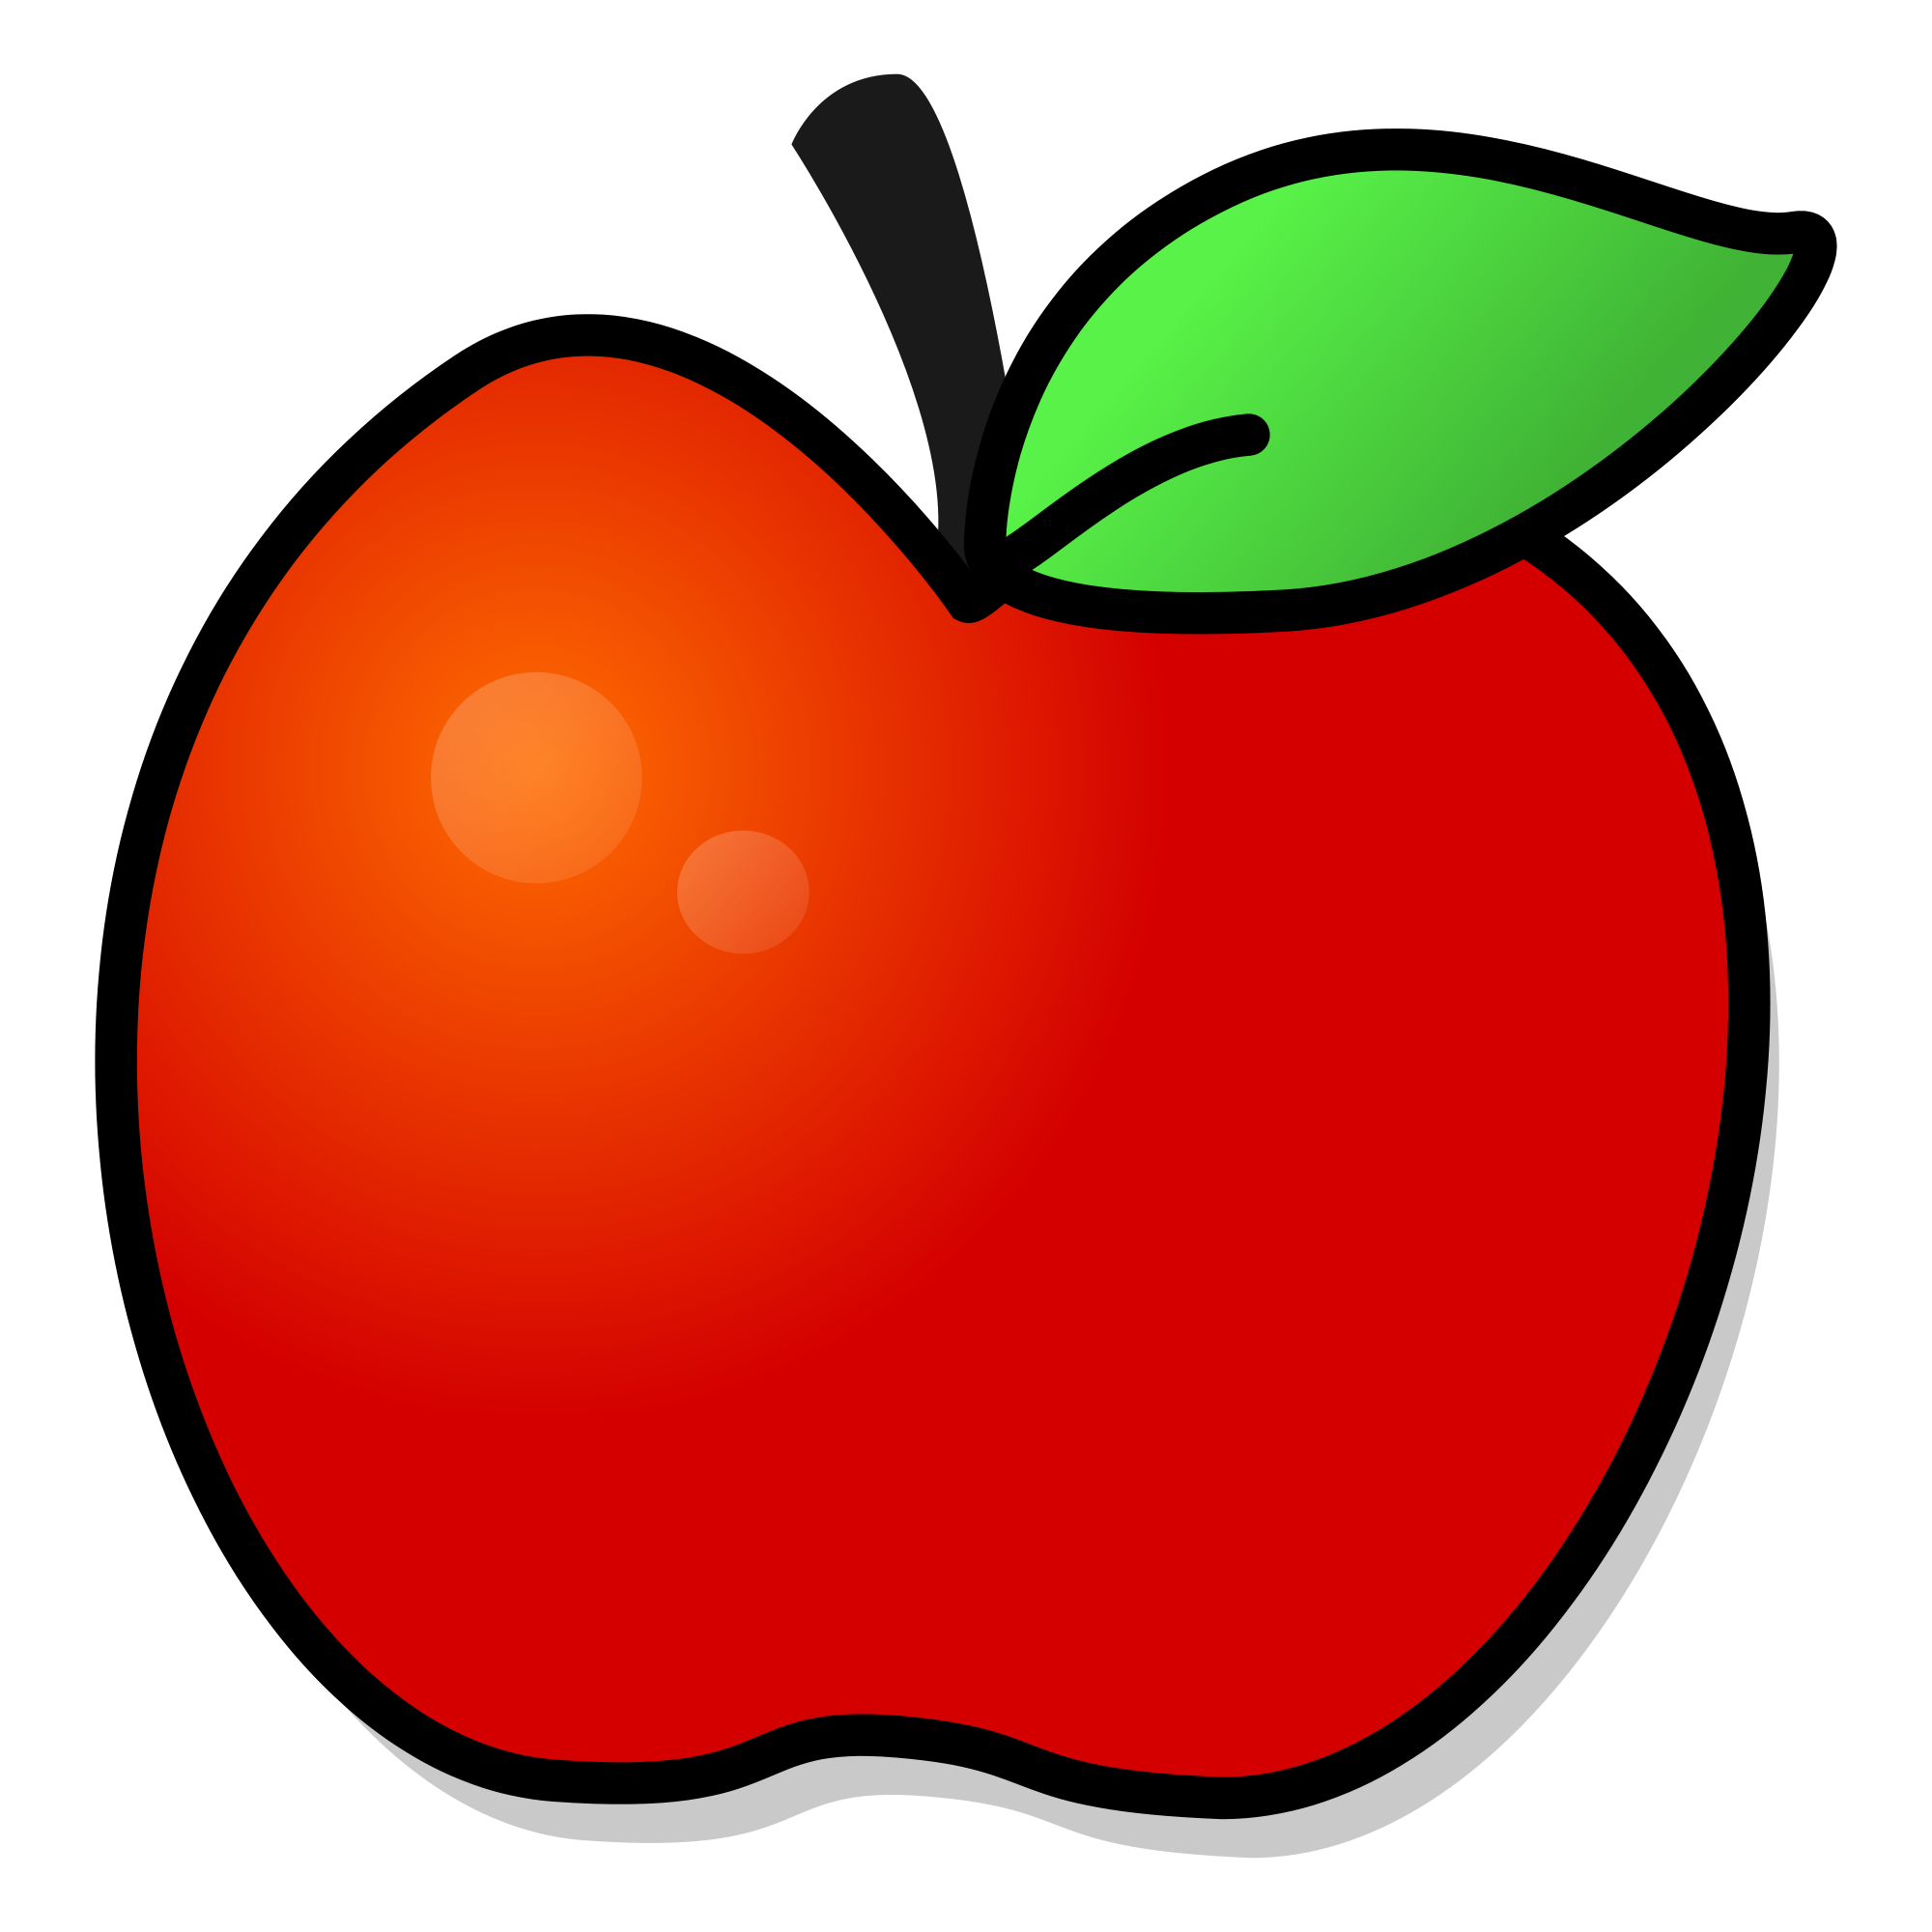 apple leaves clipart - photo #35